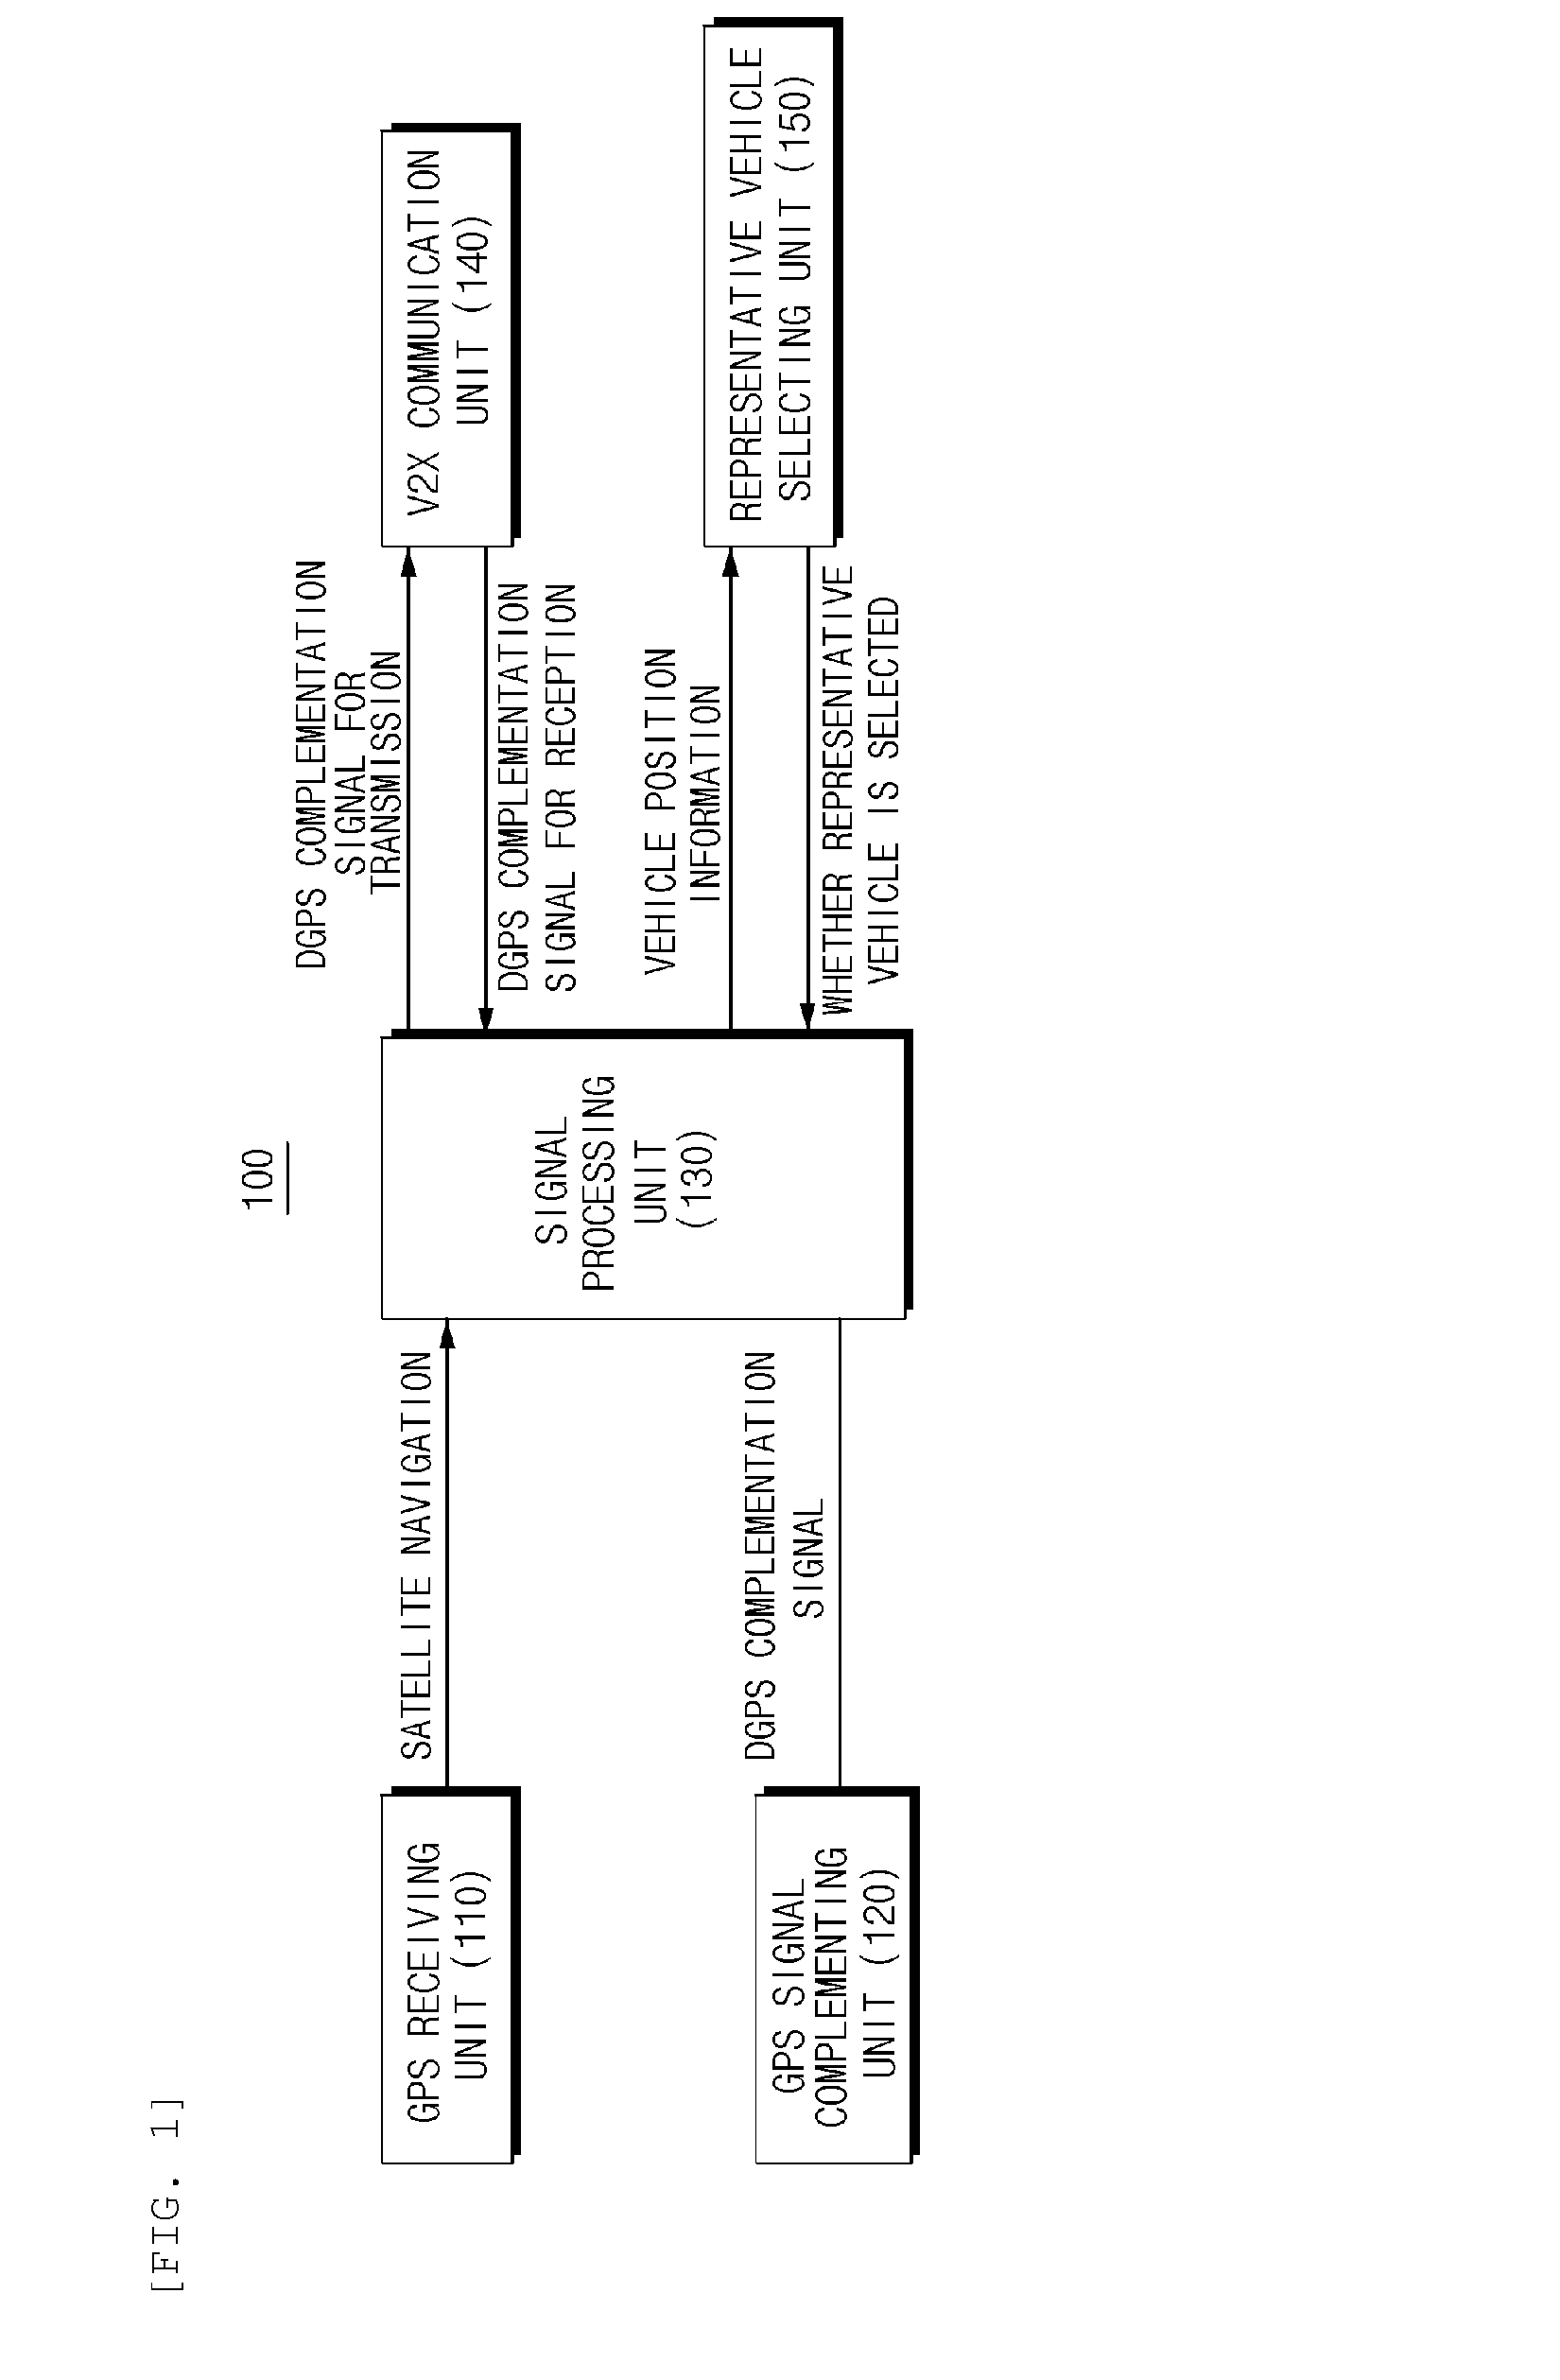 Apparatus for controlling complementing position of vehicle, and system and method for complementing position of vehicle with the said apparatus